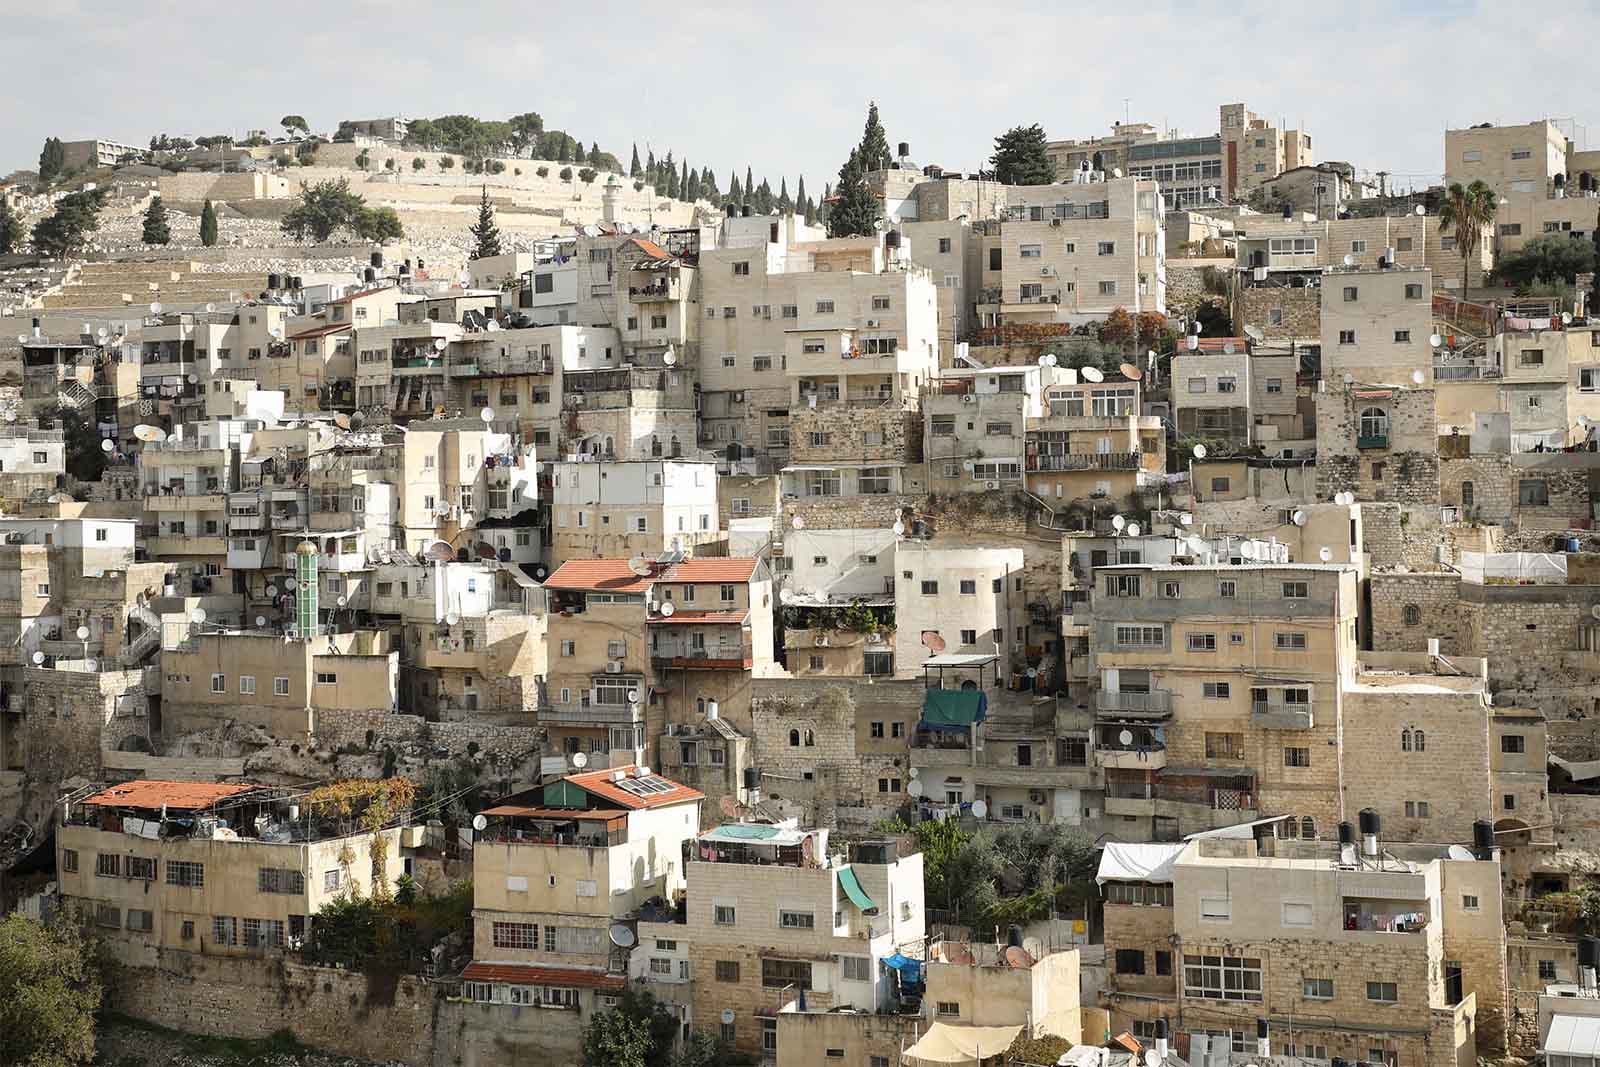 View of the East Jerusalem neighbourhood of Silwan, as seen from the City of David, on December 13, 2020. Photo by Gershon Elinson/FLASH90